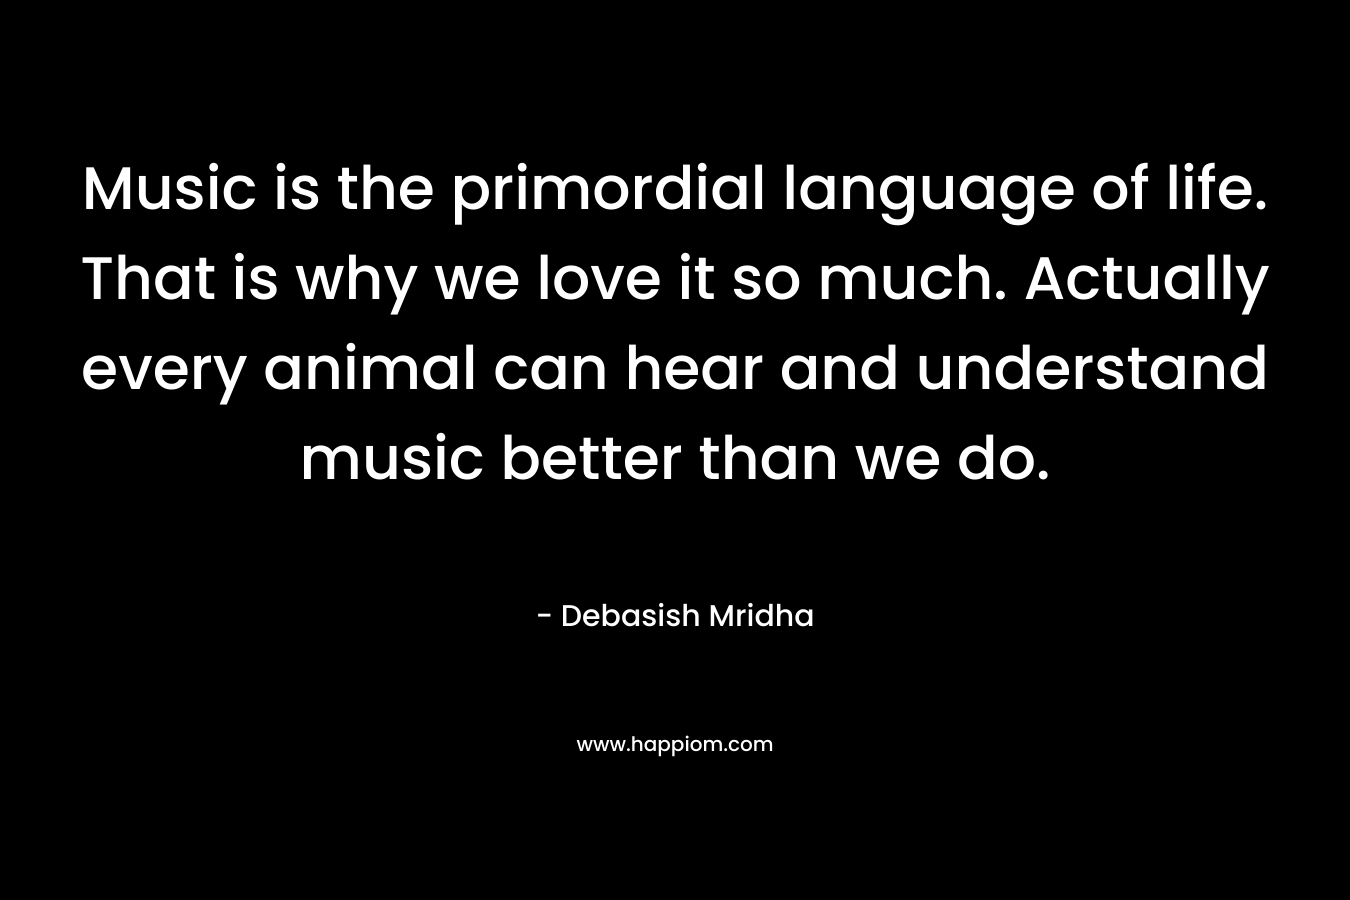 Music is the primordial language of life. That is why we love it so much. Actually every animal can hear and understand music better than we do.